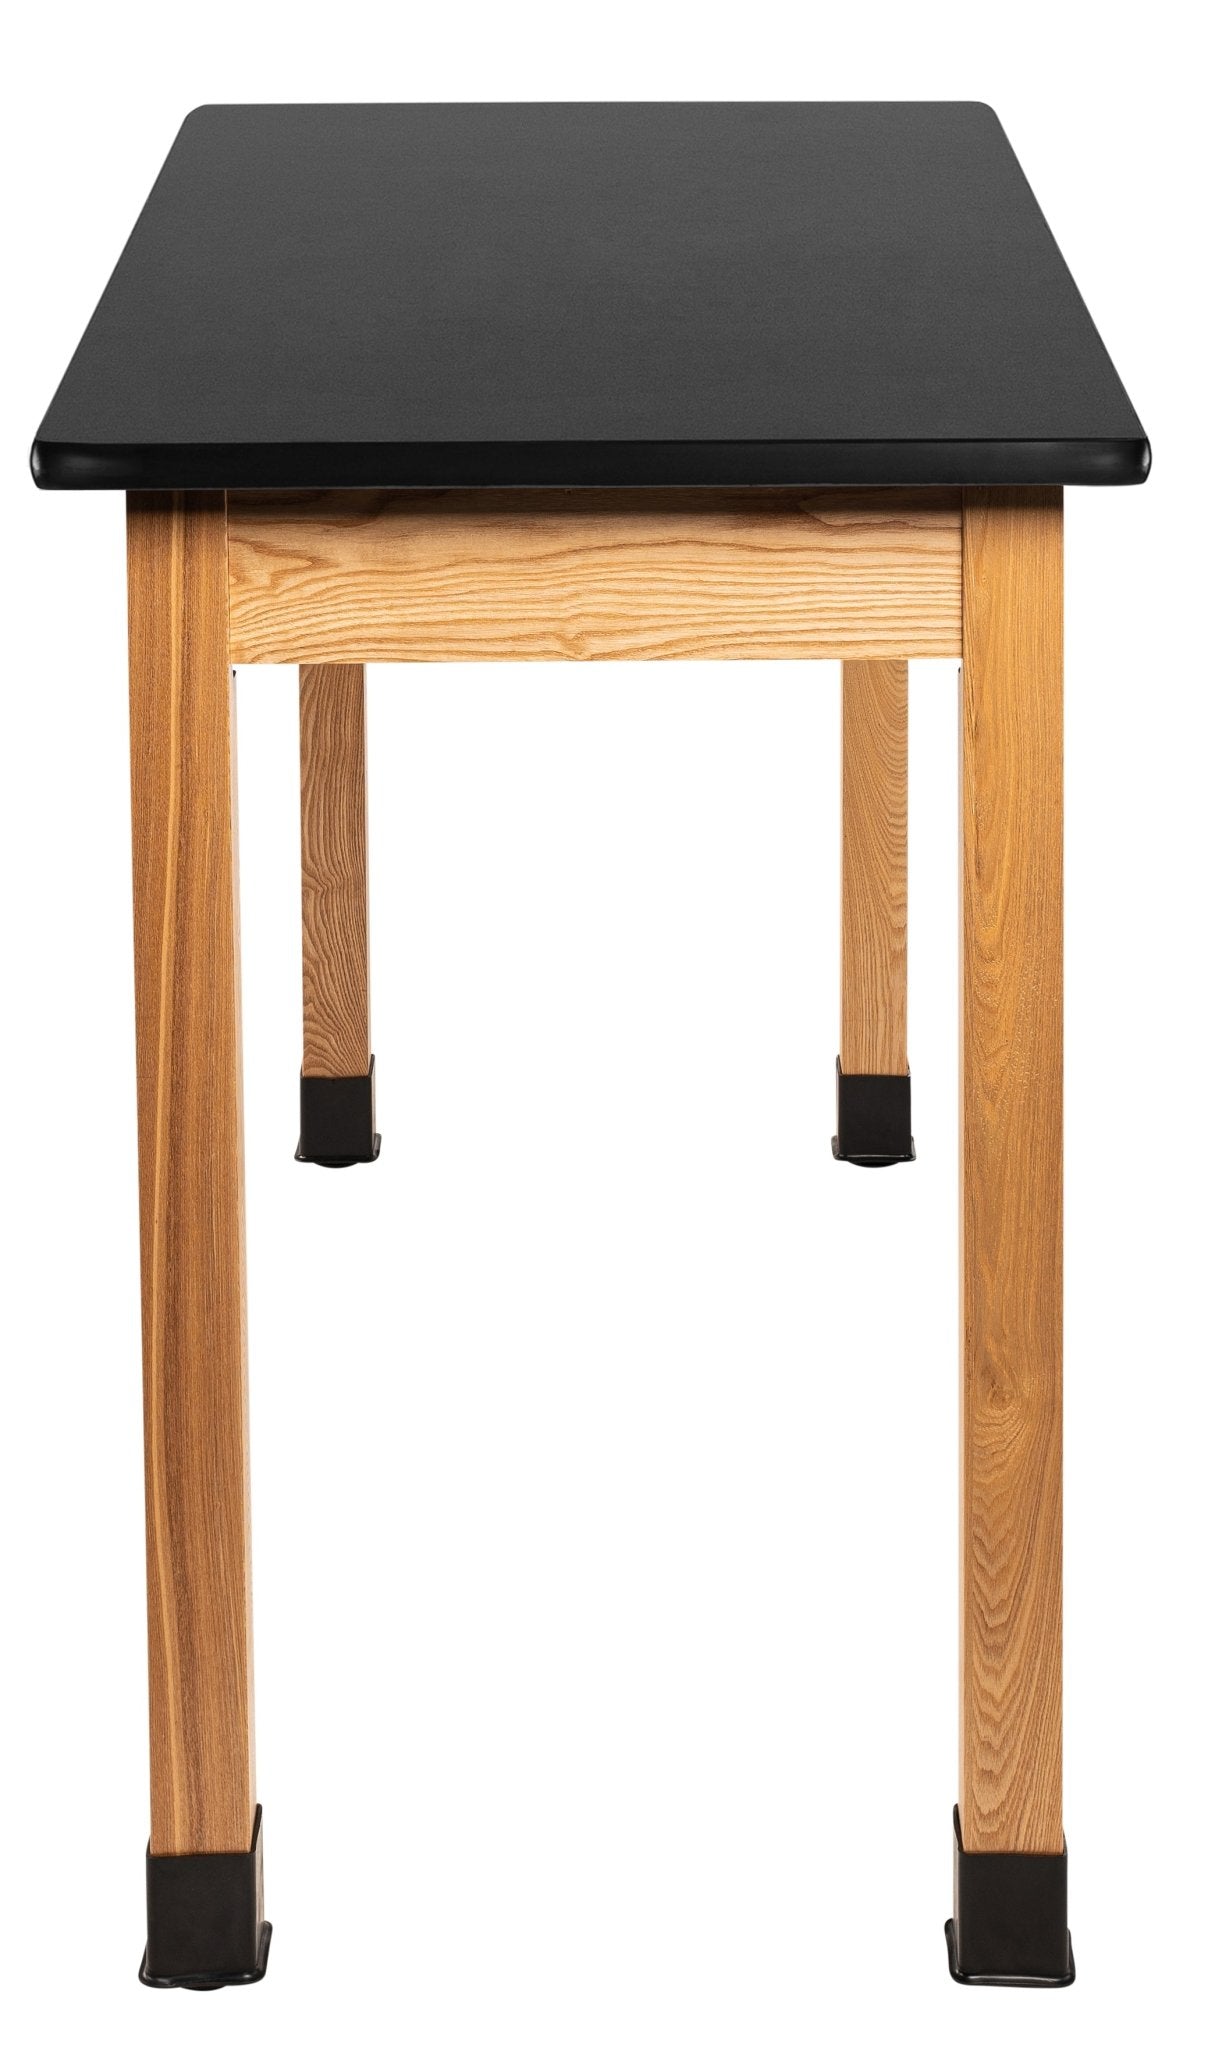 NPS Science Lab Table - High Pressure Laminate Top - w/ Book Compartment - 24"W x 48"D (National Public Seating NPS-SLT2-2448HB) - SchoolOutlet